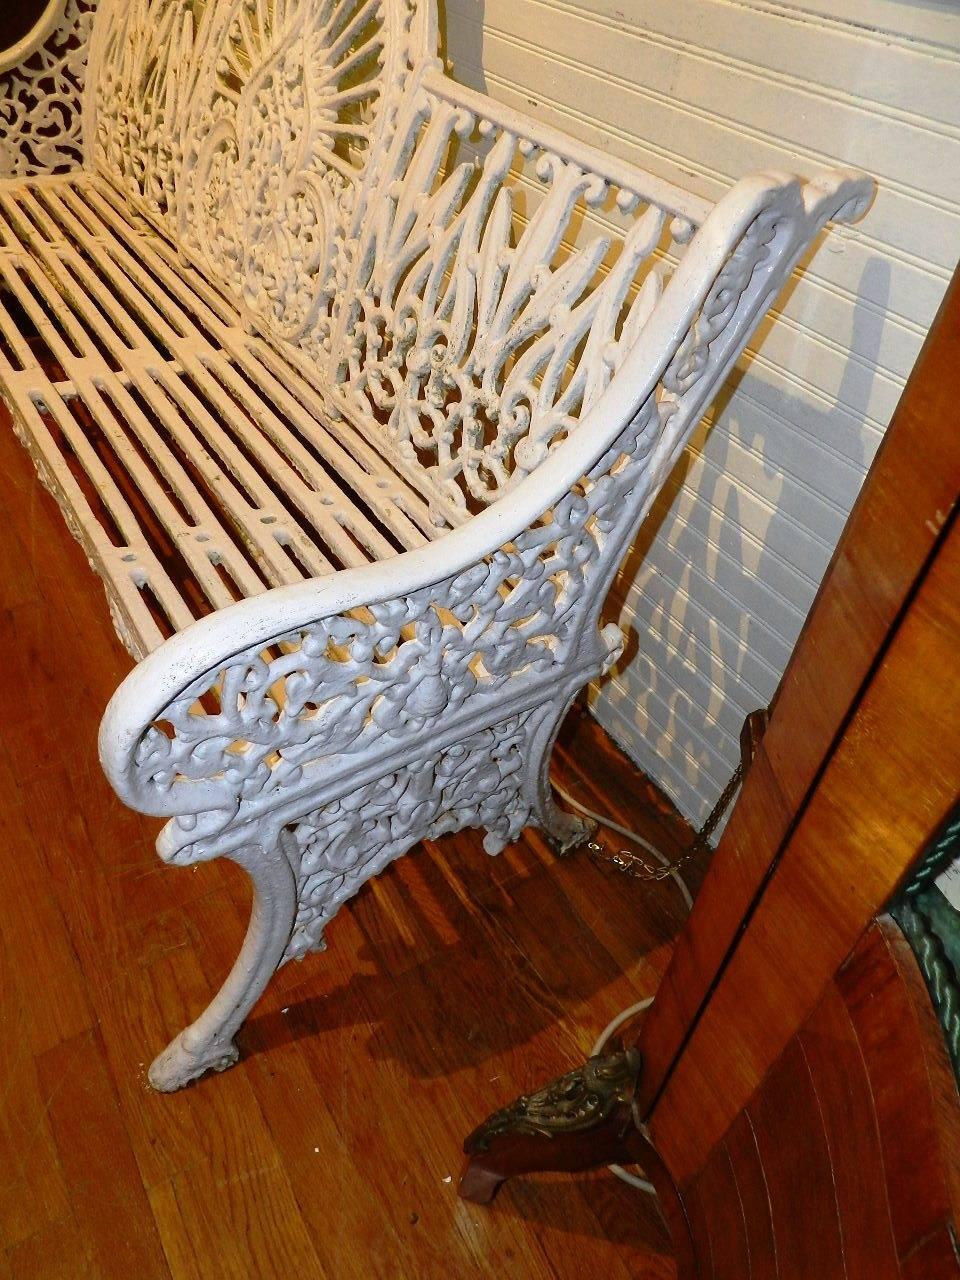 Original cast iron Coalbrookdale garden bench with the peacock pattern back and hoof like feet.